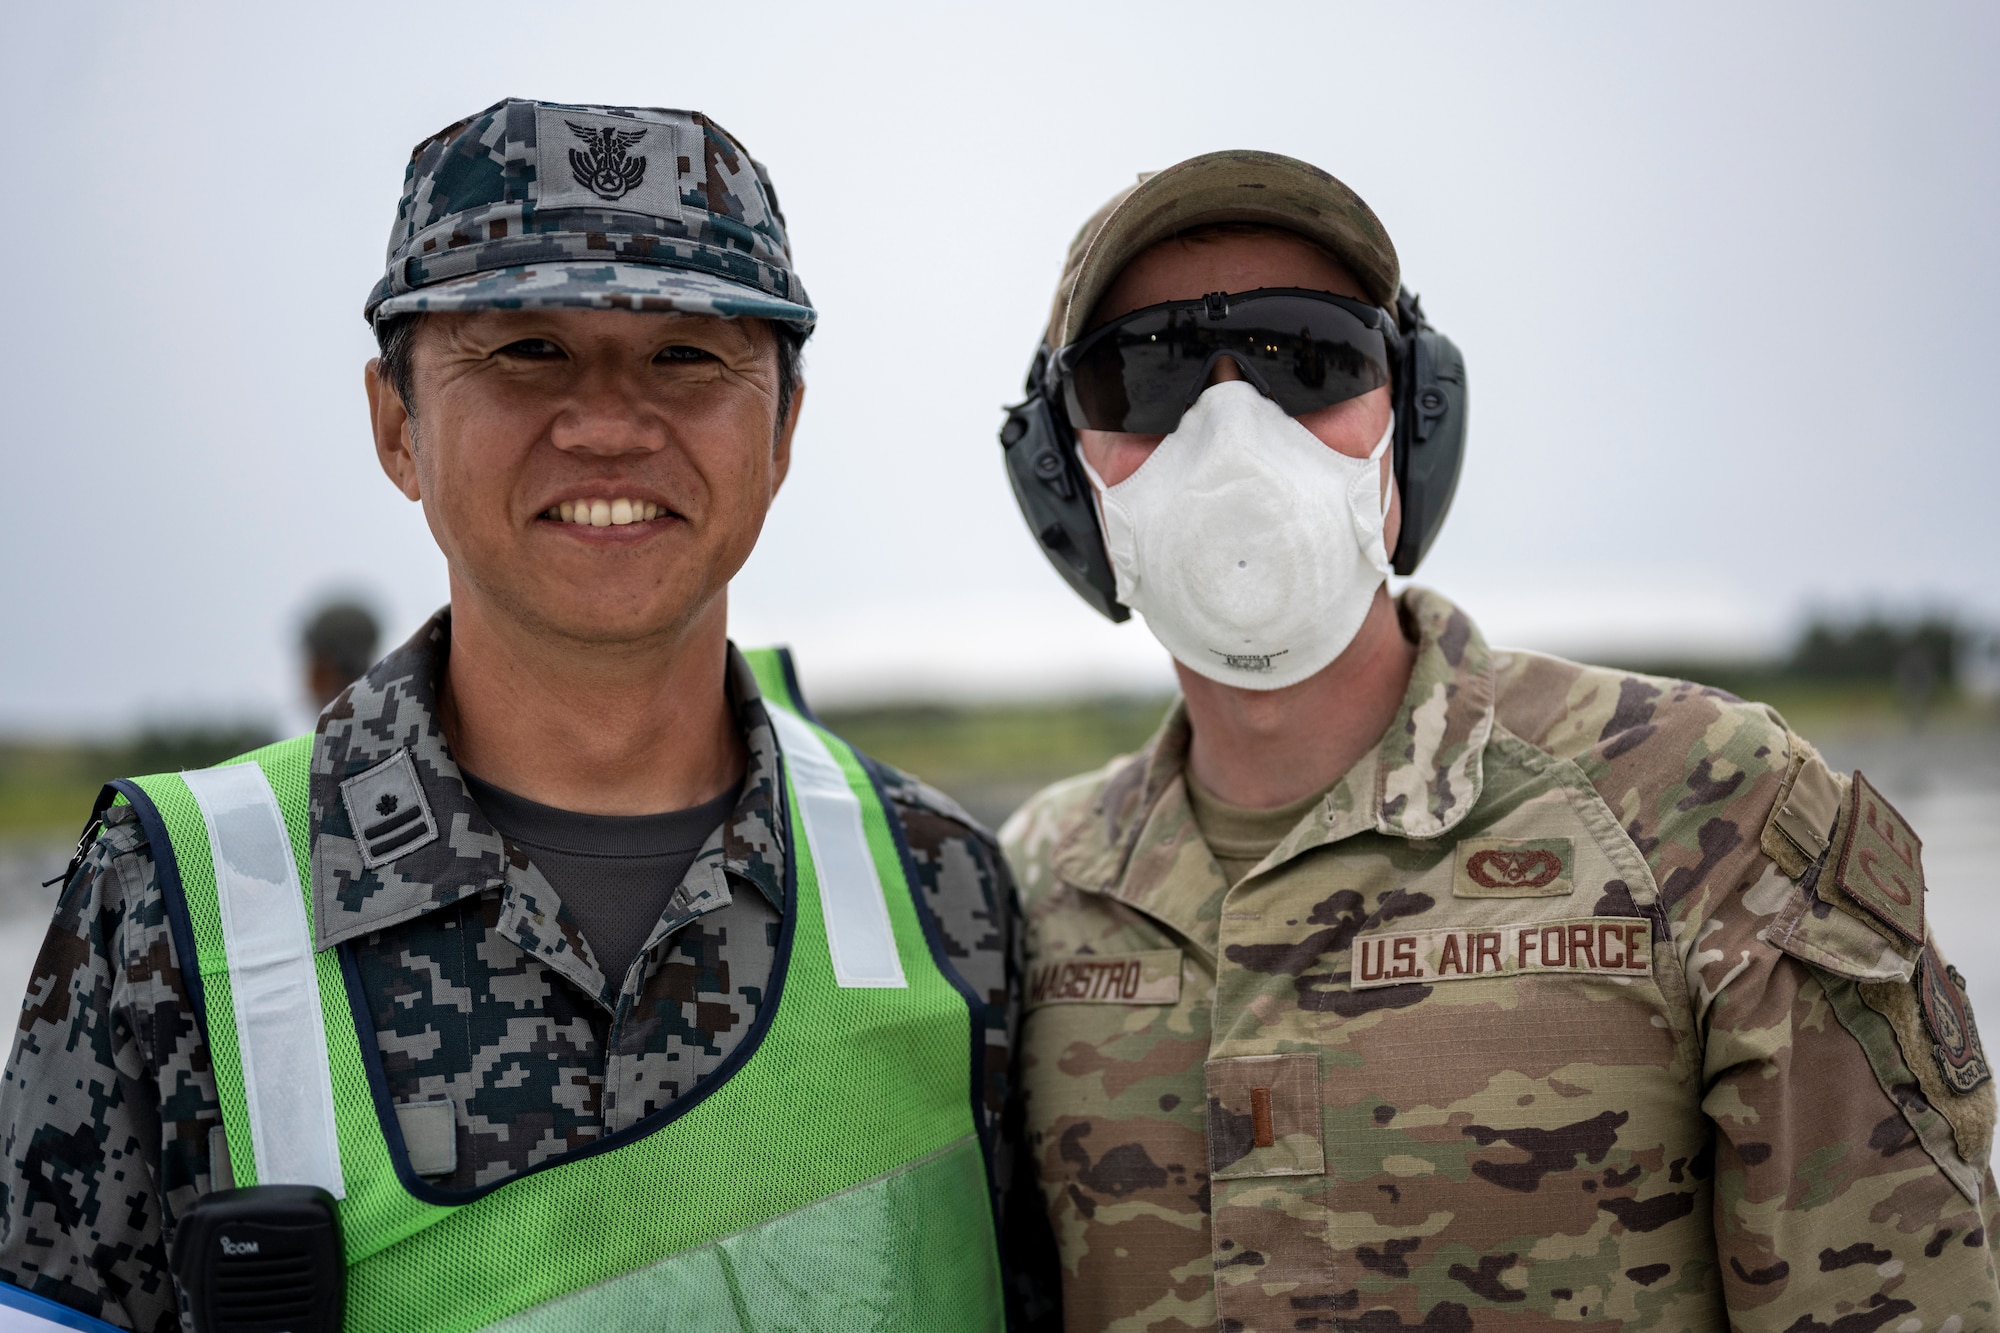 A U.S. Air Force Airman assigned to the 18th Civil Engineer Group and a Japan Air Self-Defense Force Airman assigned to the Western Air Civil Engineering Group pose for a photo during a bilateral live fire exercise.